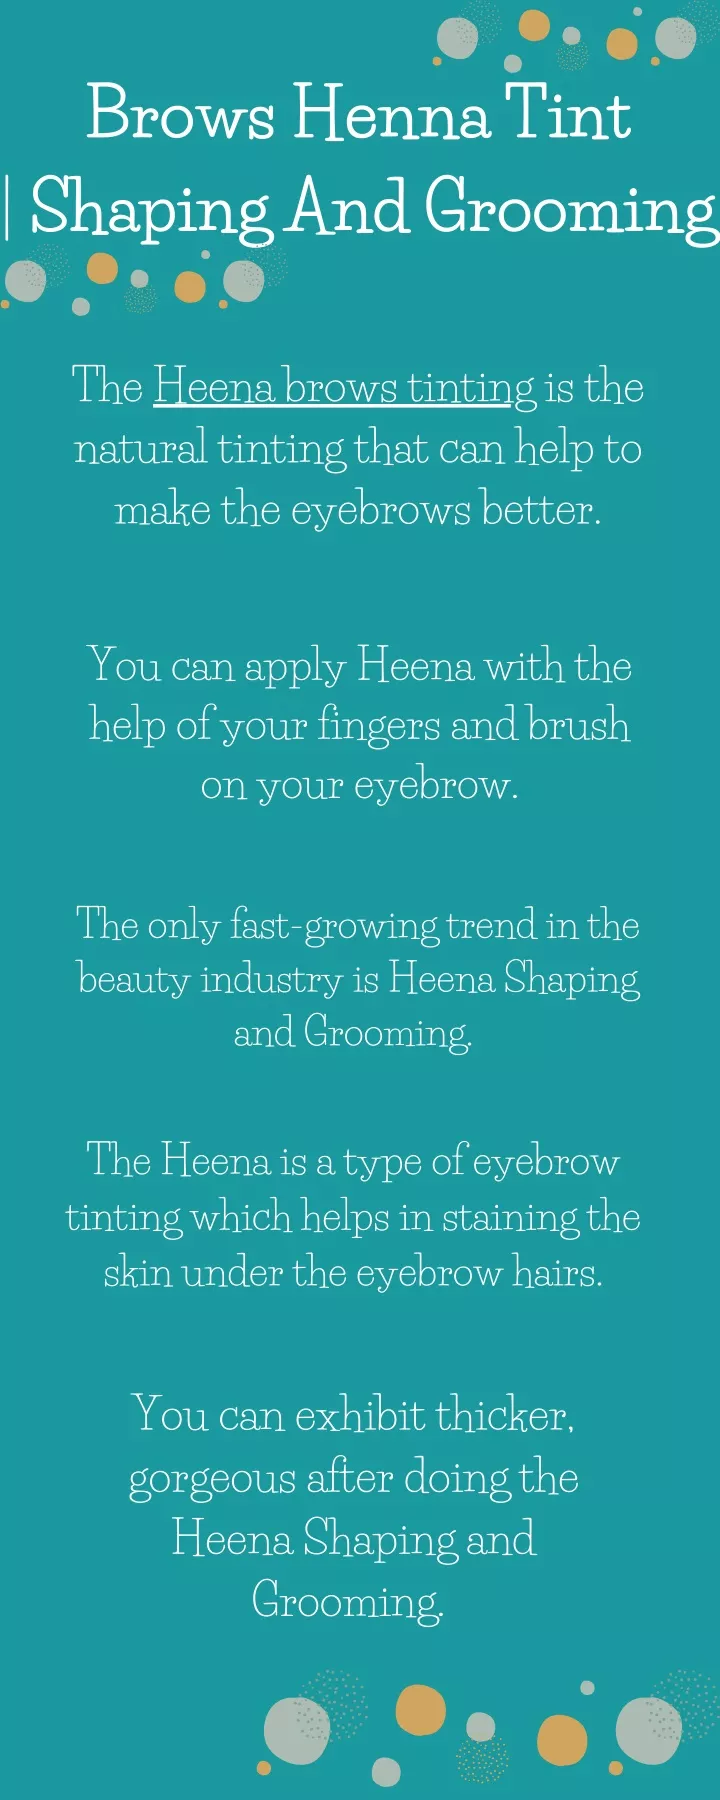 brows henna tint shaping and grooming